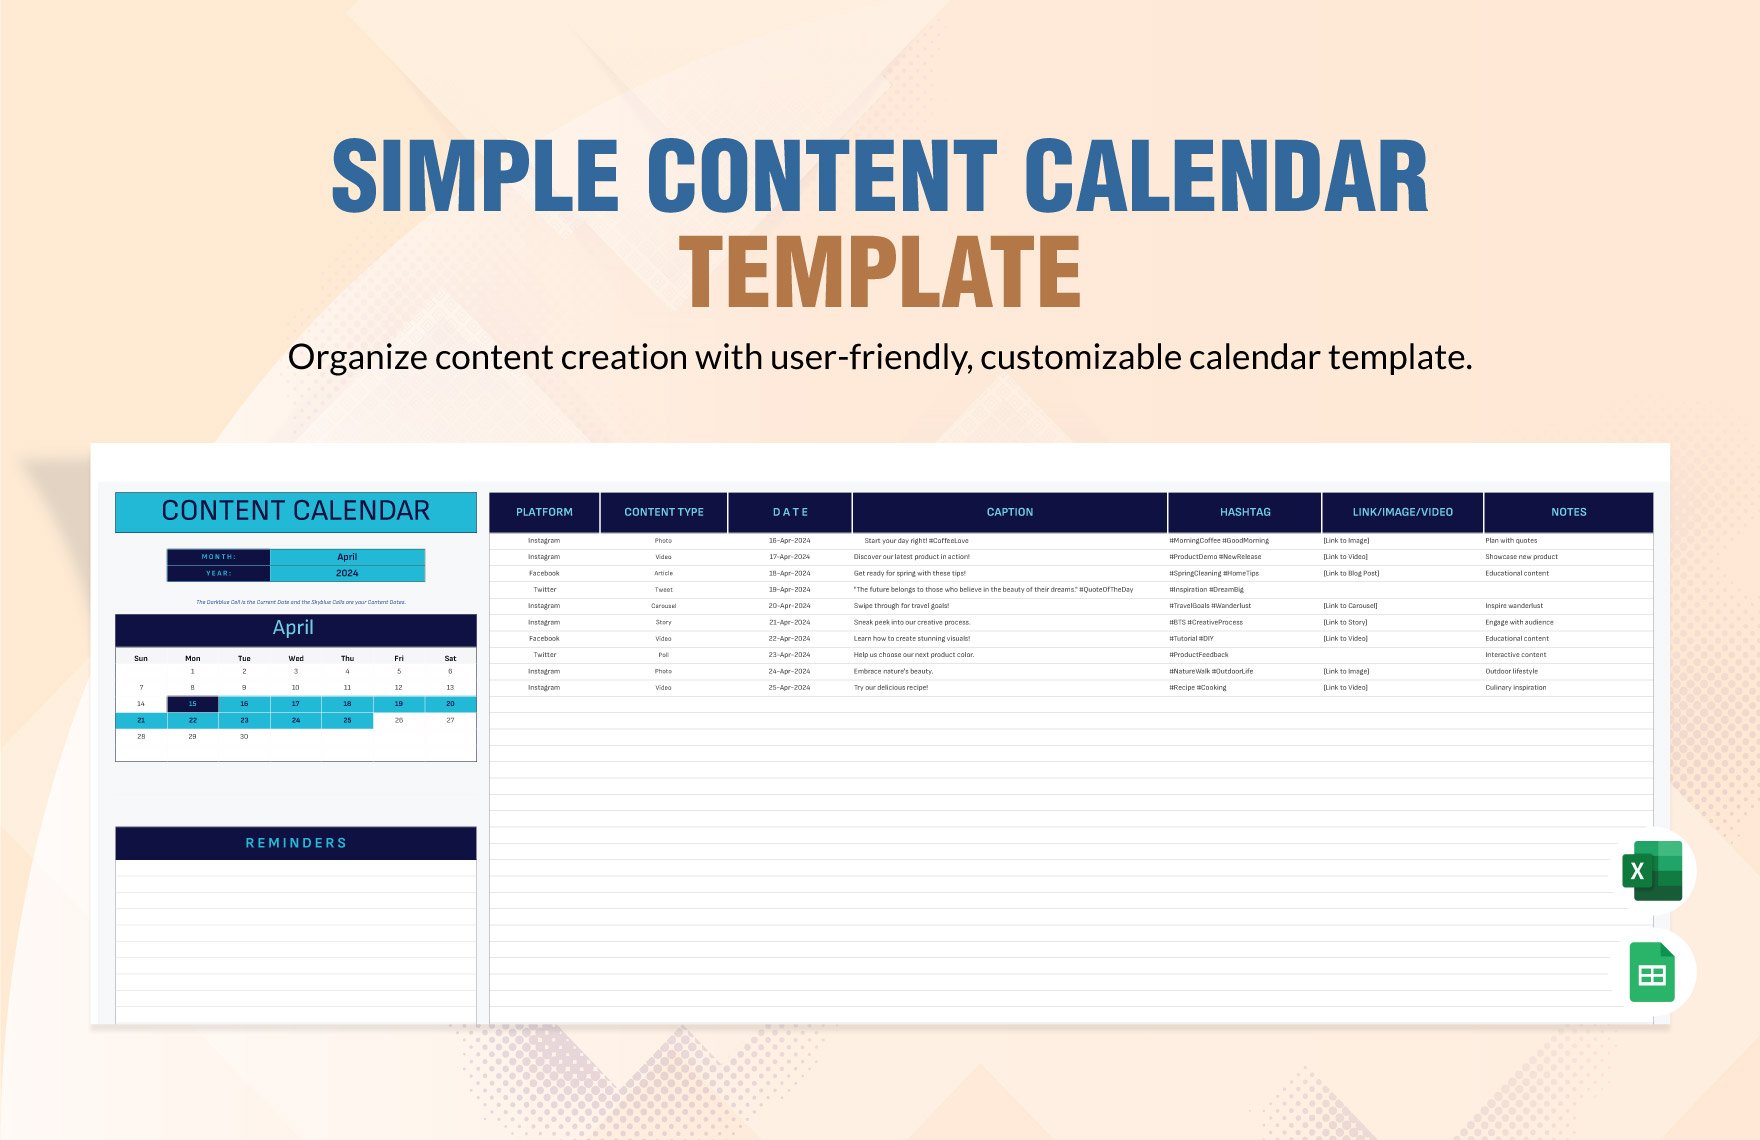 Simple Content Calendar Template in Excel, Google Sheets